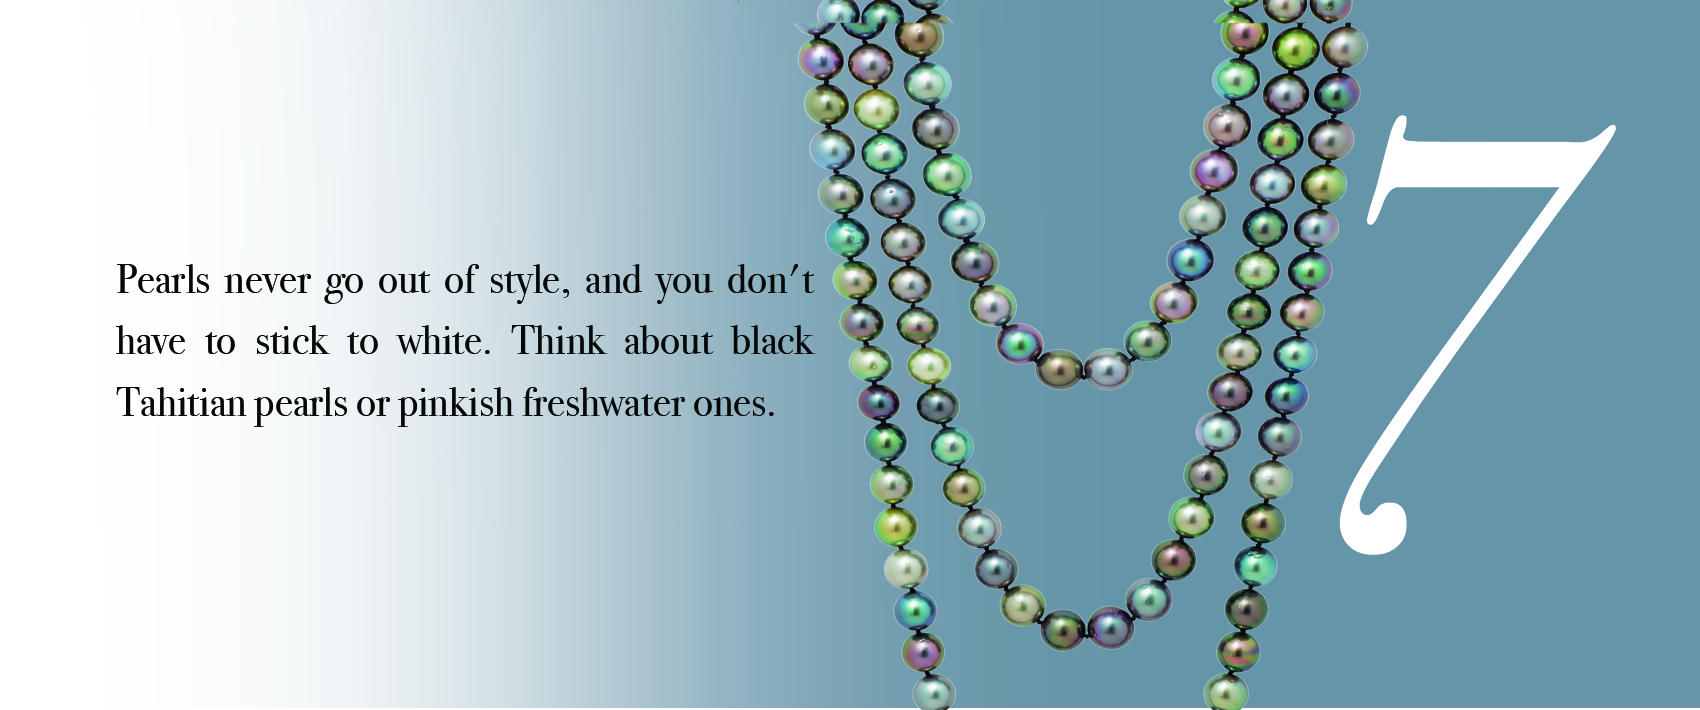 Your Jewelry Wardrobe Tip #7: Pearls never go out of style, and you don't have to stick to white. Think about black Tahitian pearls or pinkish freshwater ones.